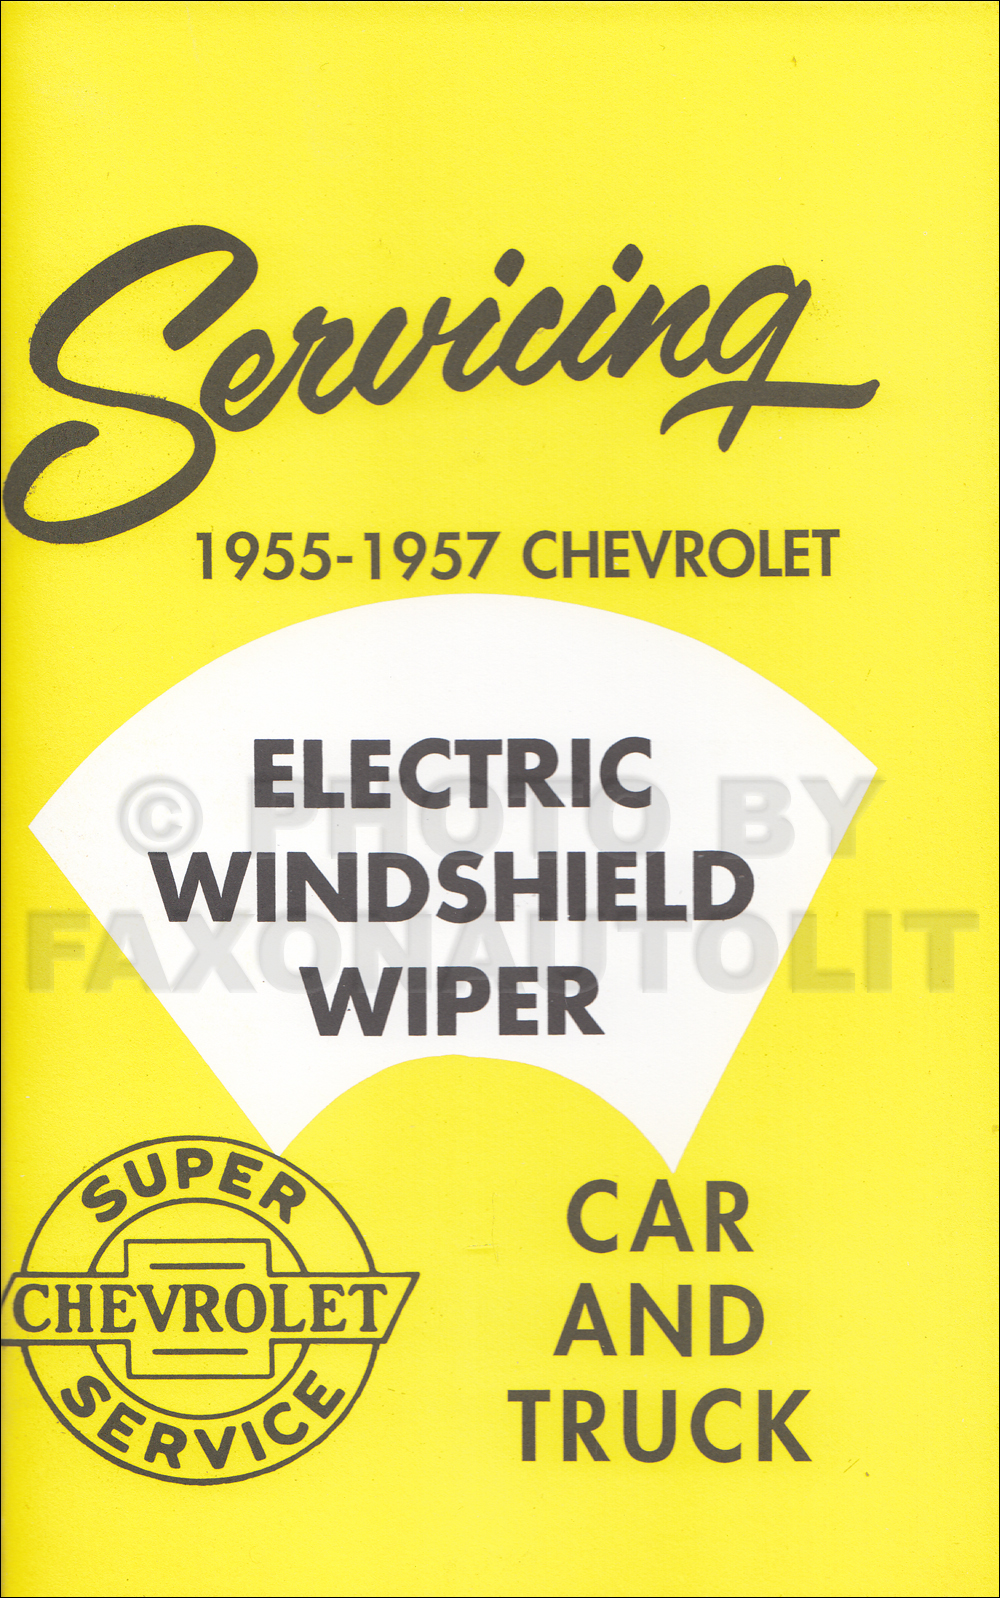 1955-1957 Chevrolet Windshield Wipers Service Training Manual Reprint